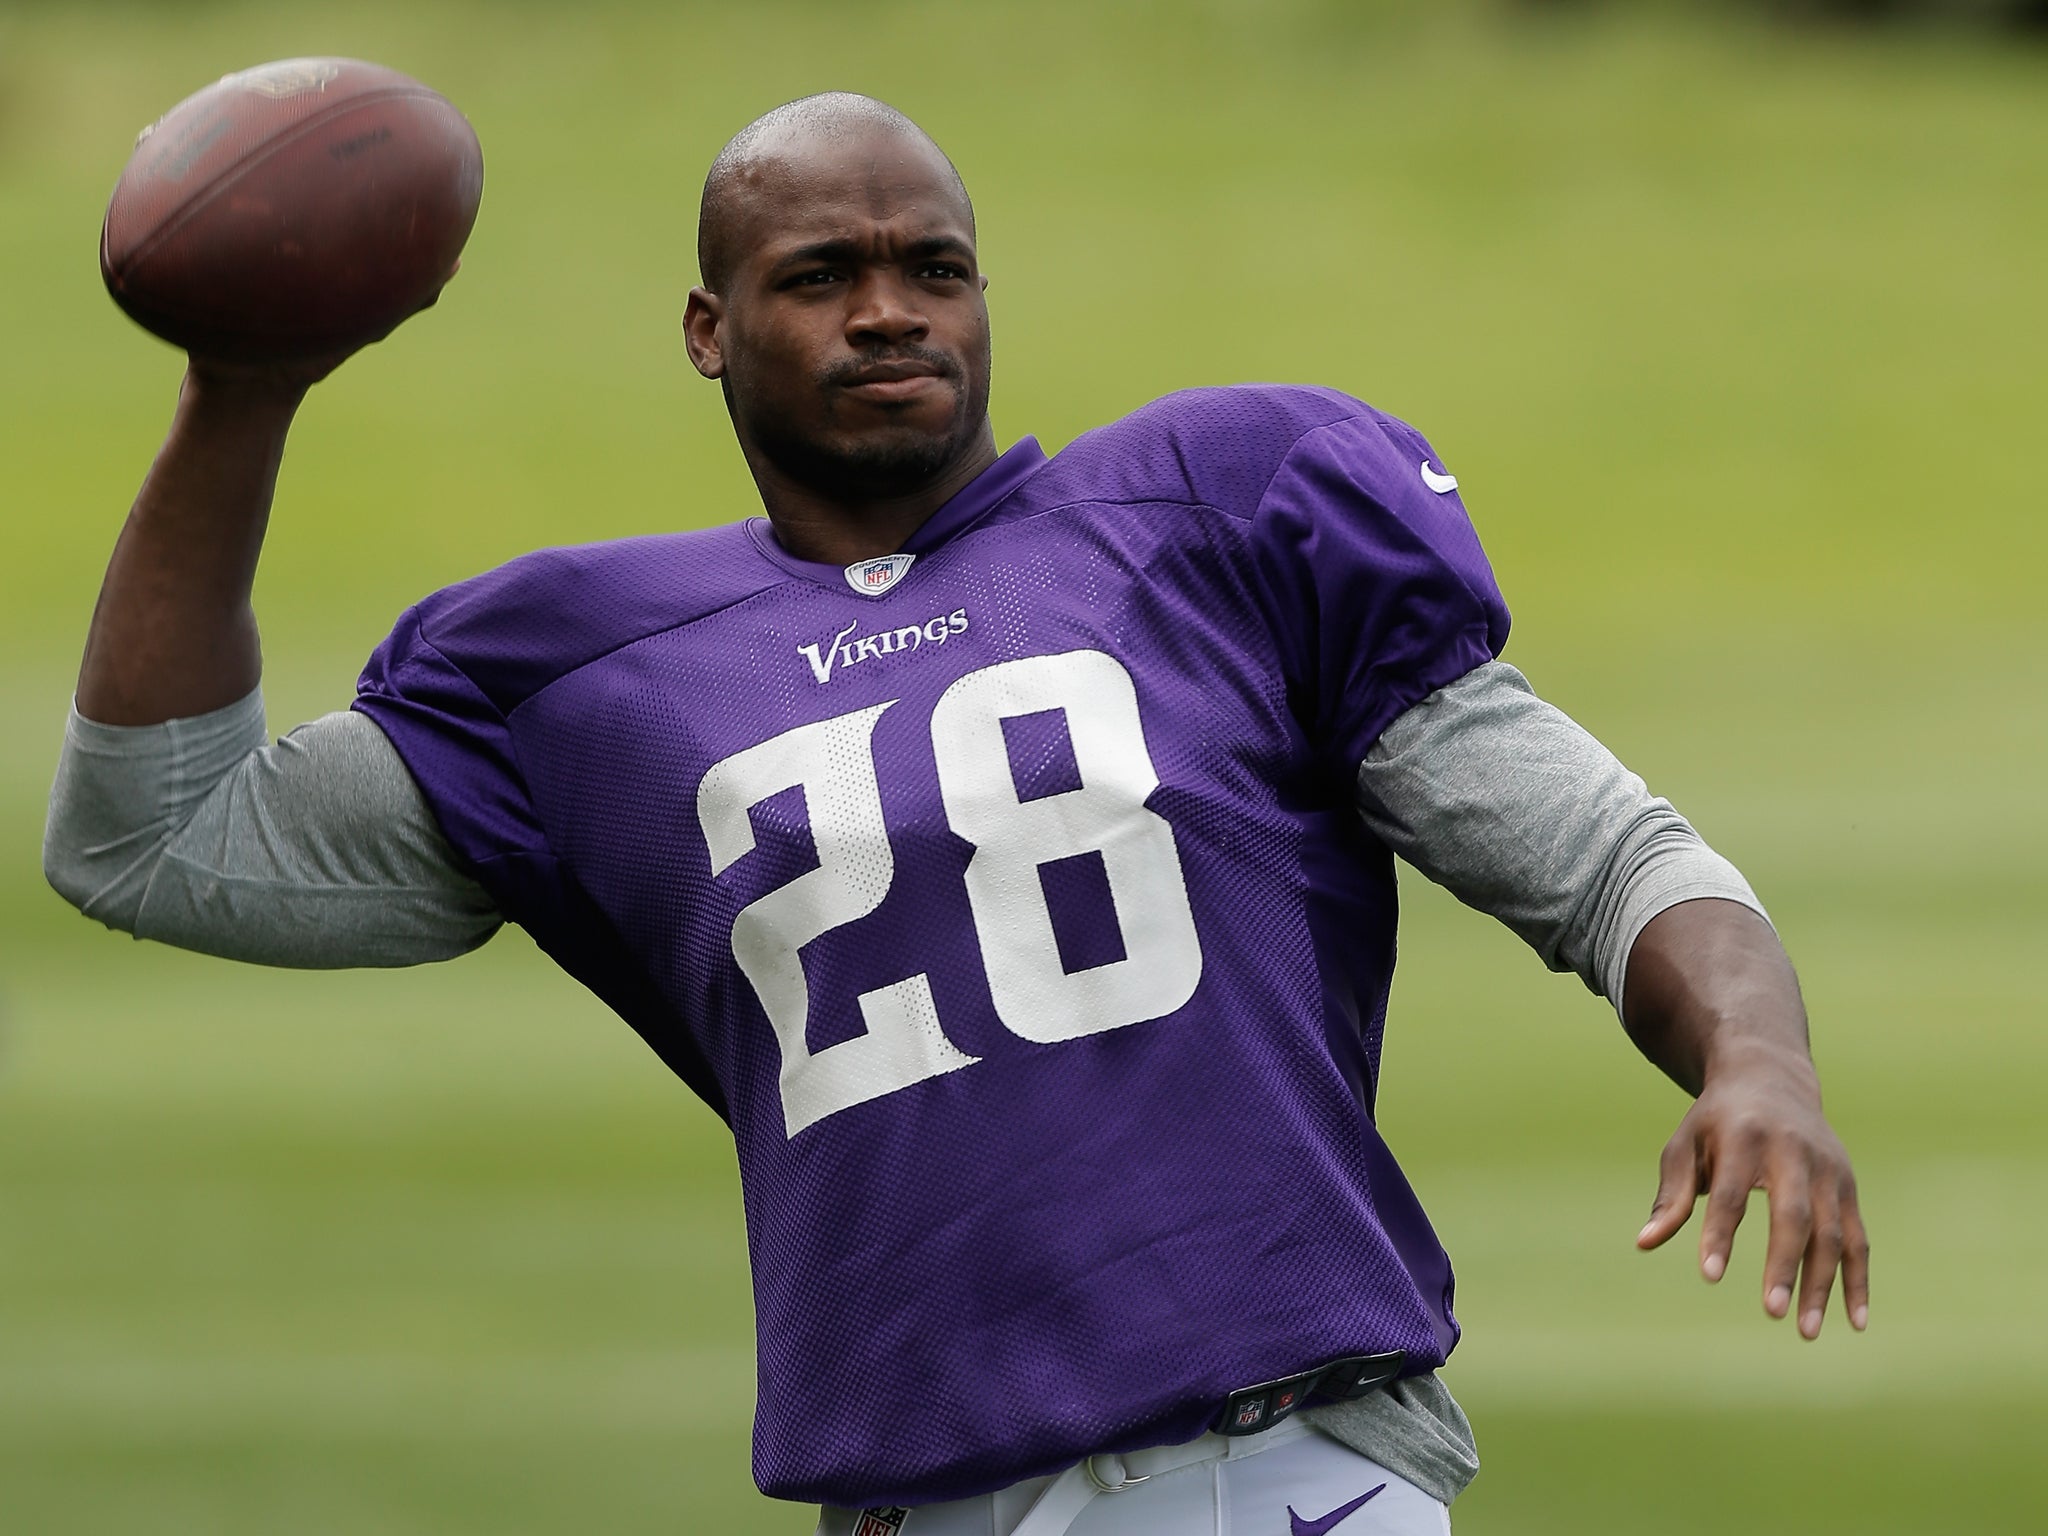 Adrian Peterson practicing ahead on the Minnesota Vikings NFL match against the Pittsburgh Steelers at Wembley